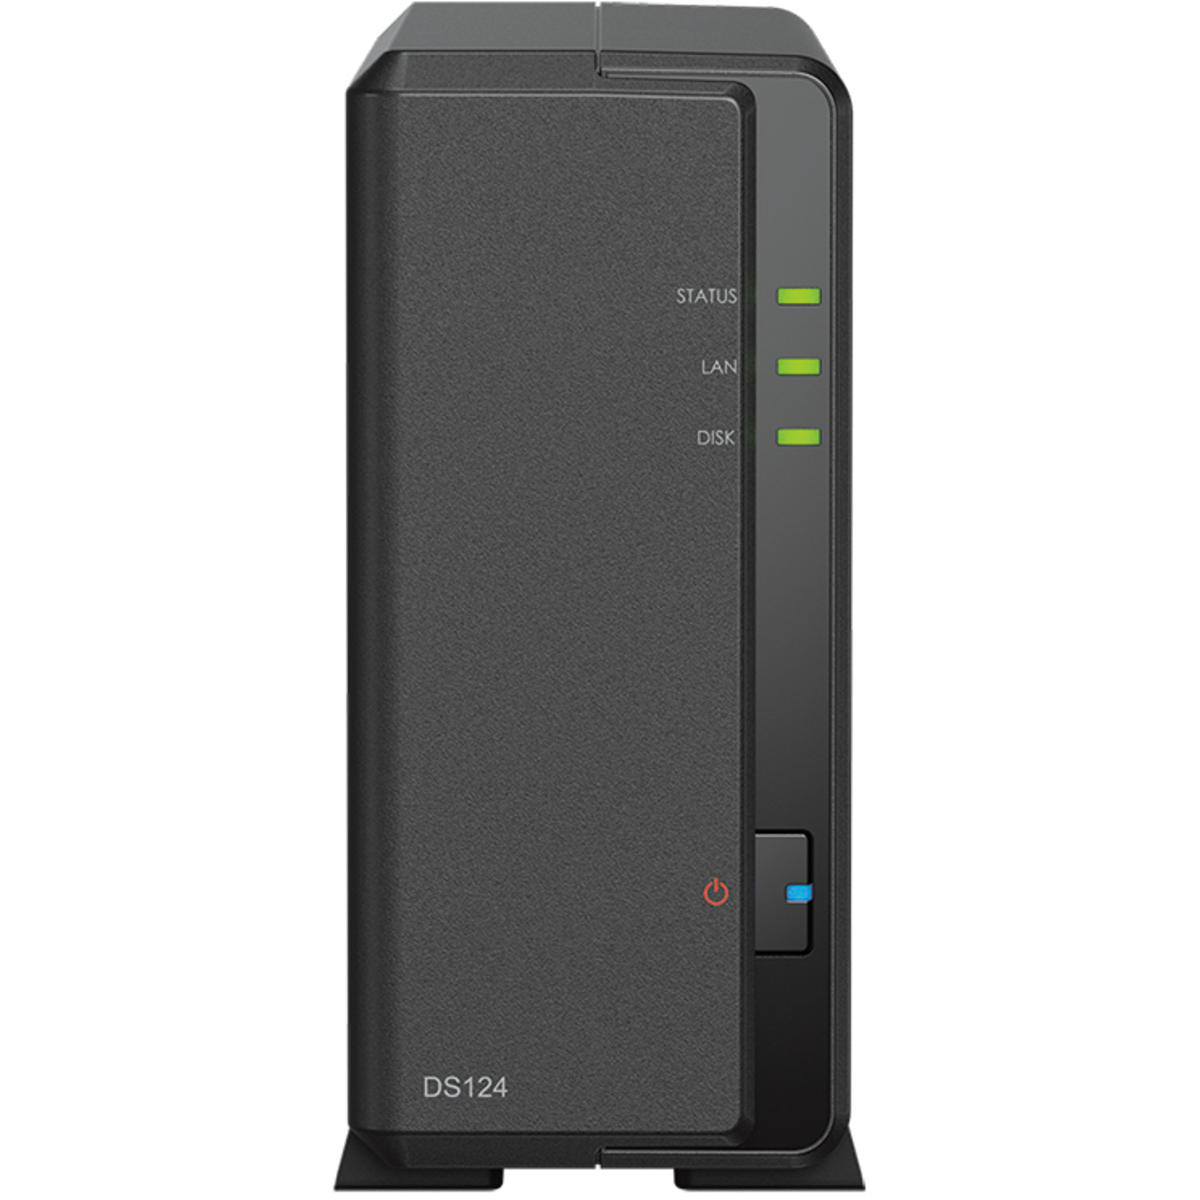 Synology DiskStation DS124 2tb 1-Bay Desktop Personal / Basic Home / Small Office NAS - Network Attached Storage Device 1x2tb Western Digital Red SA500 WDS200T1R0A 2.5 560/530MB/s SATA 6Gb/s SSD NAS Class Drives Installed - Burn-In Tested DiskStation DS124